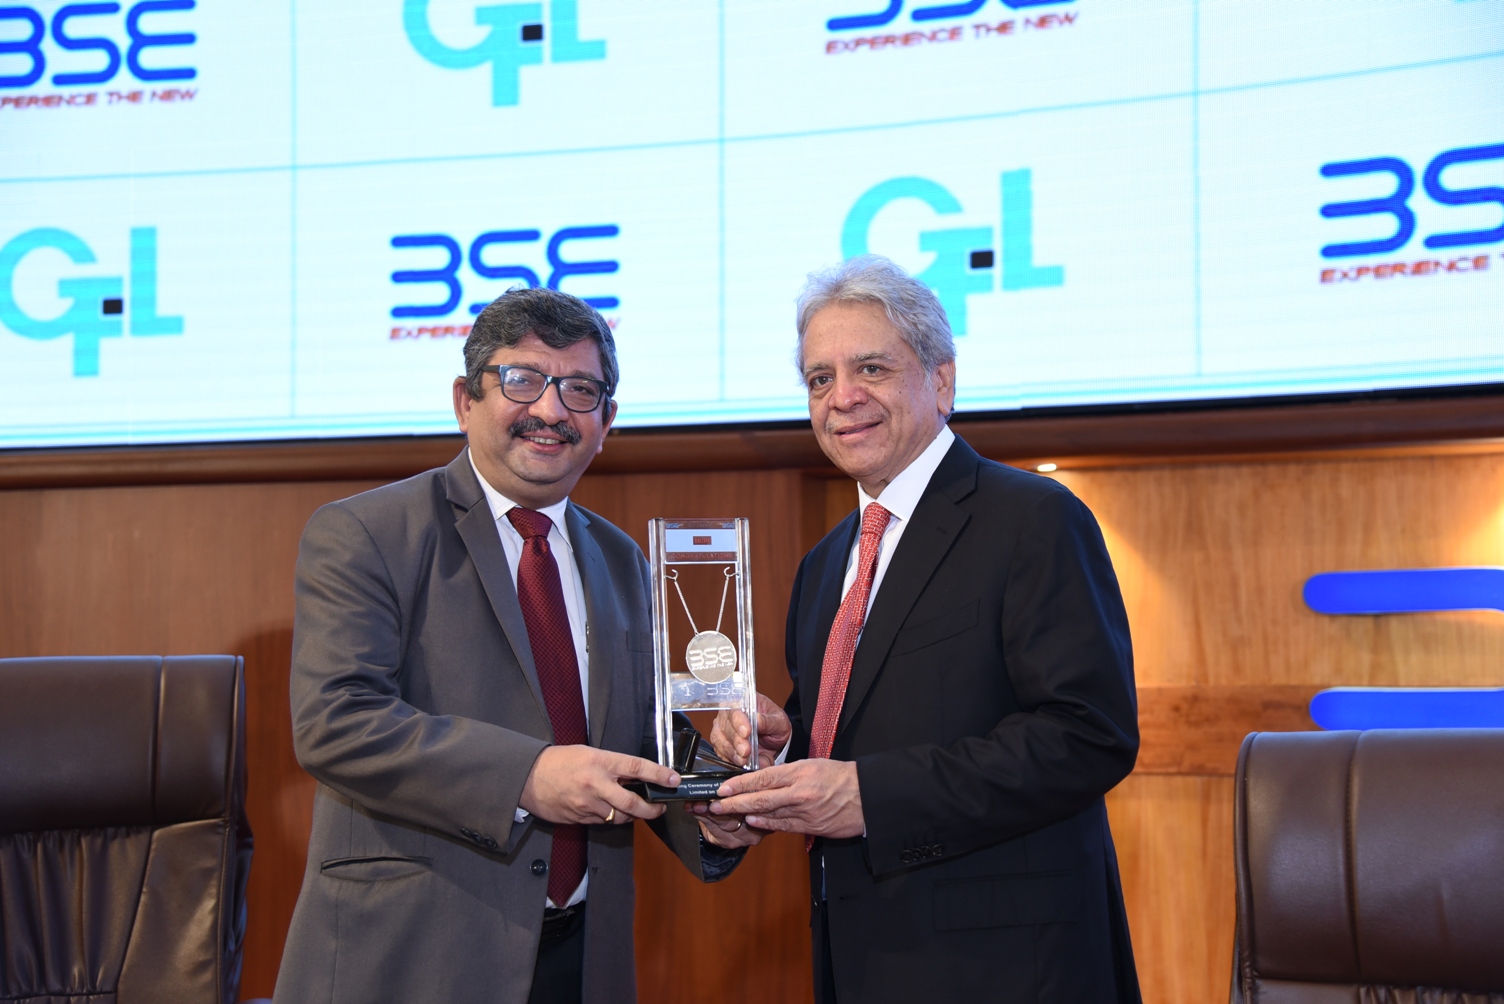 Mr. Kersi Tavadia (CIO, BSE) presenting the memento to Mr. Vivek Jain (MD, Gujarat Fluorochemicals Limited) at the listing ceremony of Gujarat Fluorochemicals Ltd held today in Mumbai at BSE.